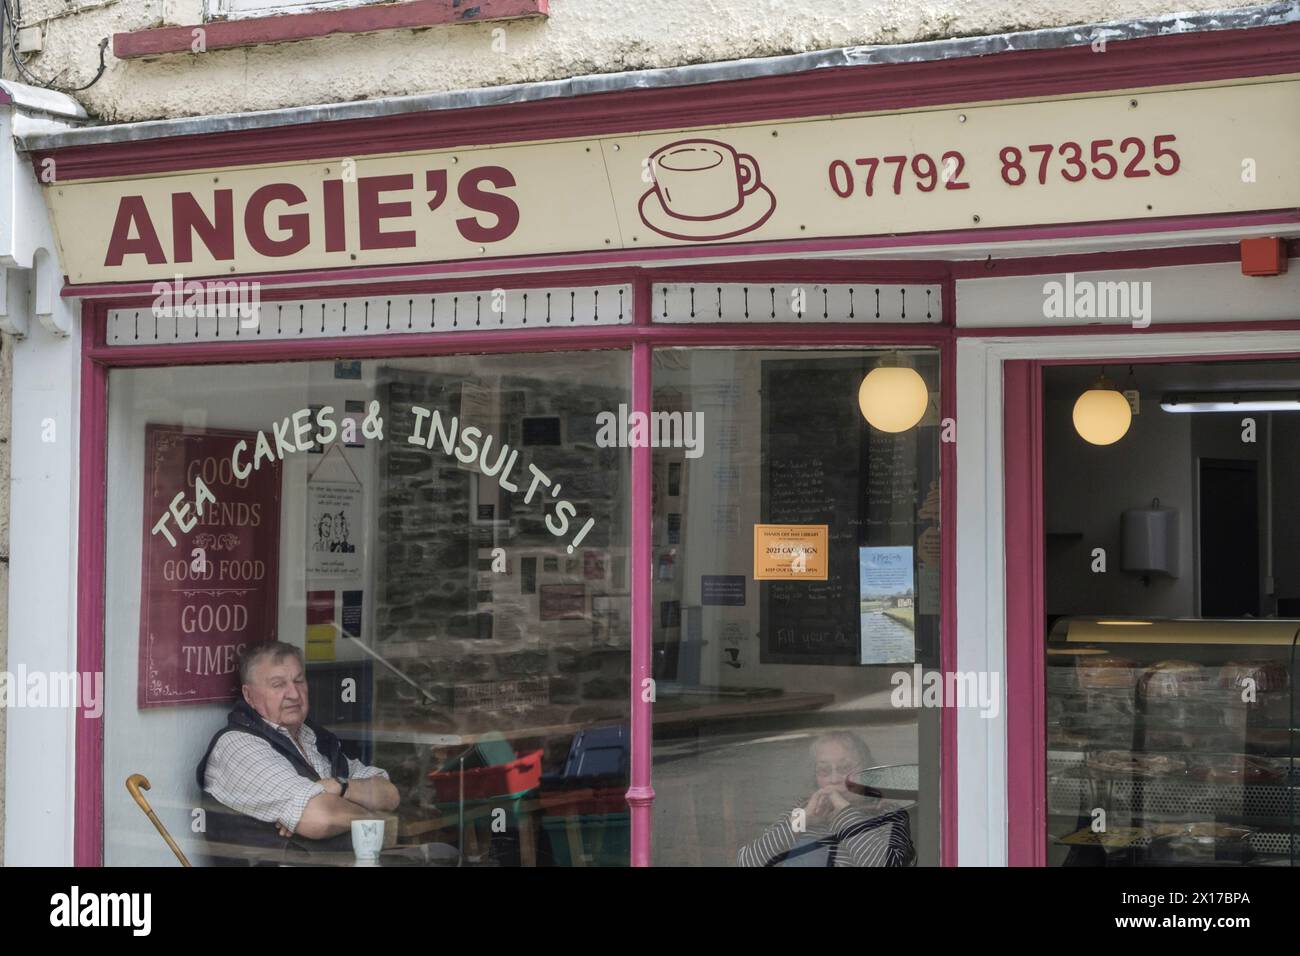 Hay-on-Wye a town of books in Powys Wales UK  Angies Cafe Stock Photo